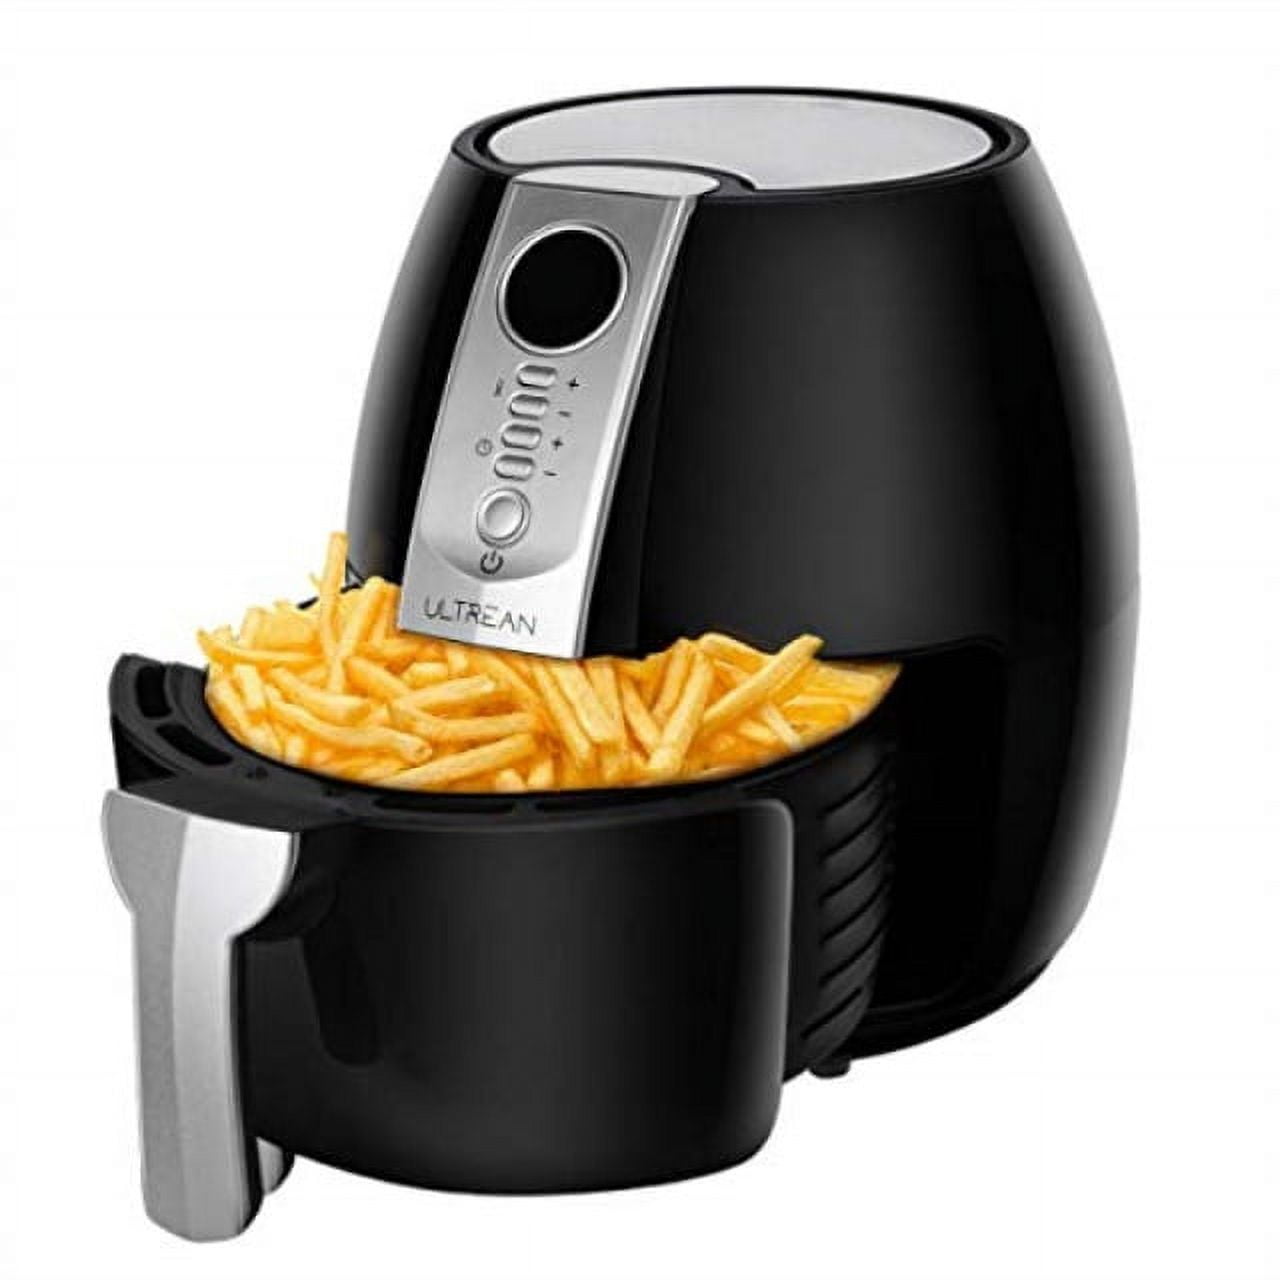 Ultrean Air Fryer, Electric Hot Air Fryers Oven Cooker with Deluxe Temperature and Time Knob, 4.5 Quart Non-Stick Basket